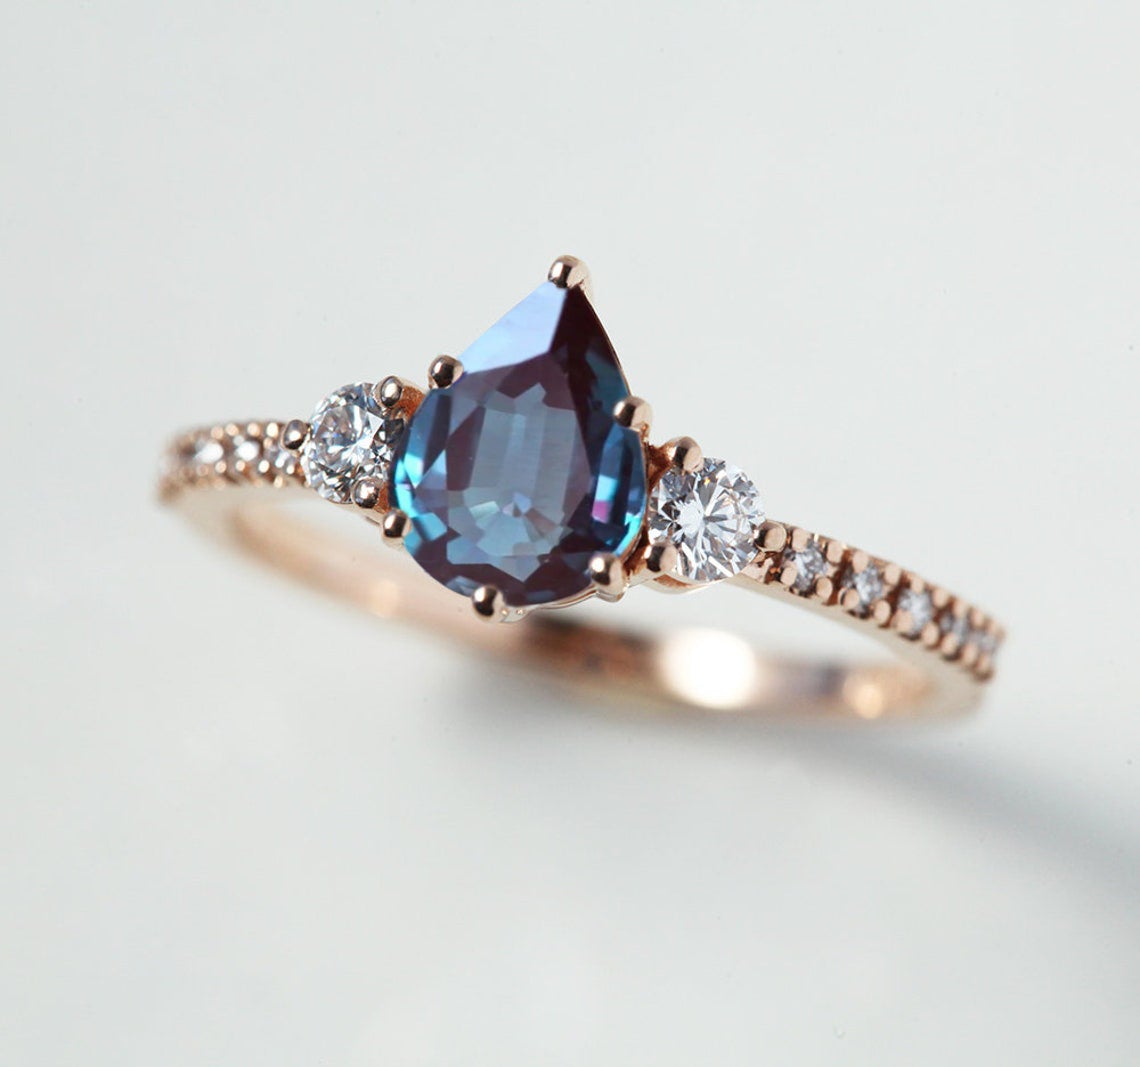 Teal Pear Alexandrite Ring with Side Round White Diamonds and Diamonds in the band